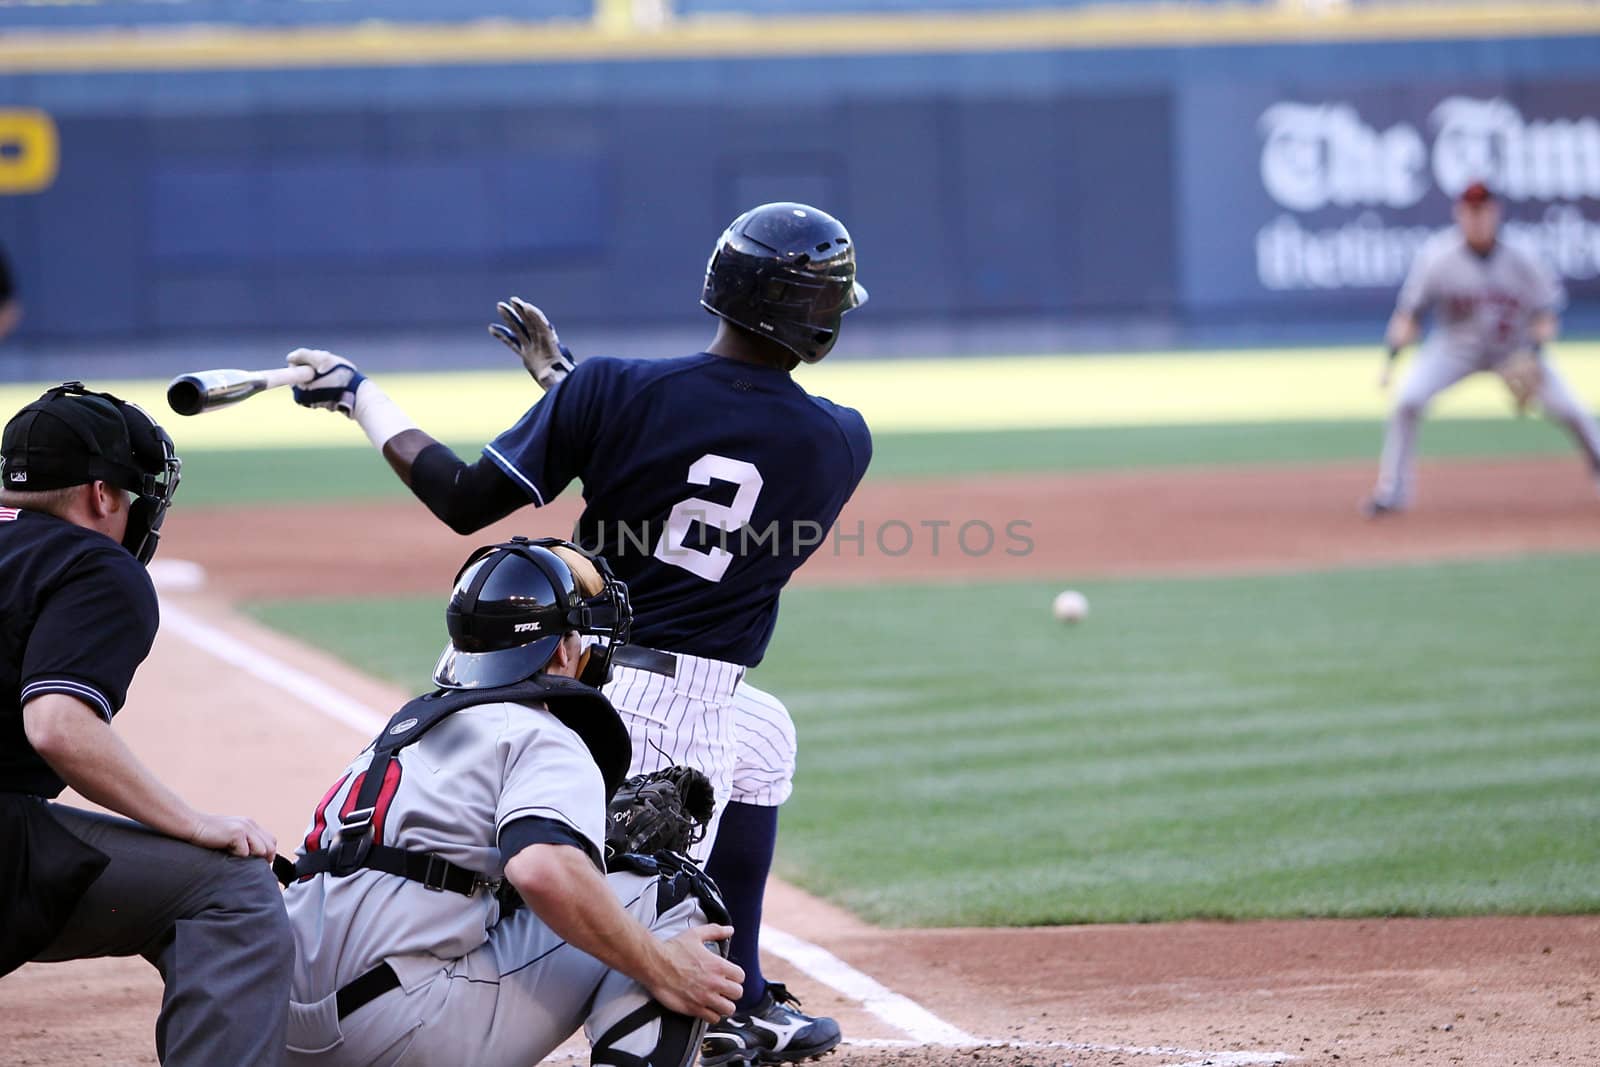 SCRANTON, PA - JULY 9: Scranton Wilkes Barre Yankees batter Greg Golson swings and hits the ball in a game against the Rochester Red Wings at PNC Field on July 9, 2011 in Scranton, PA.